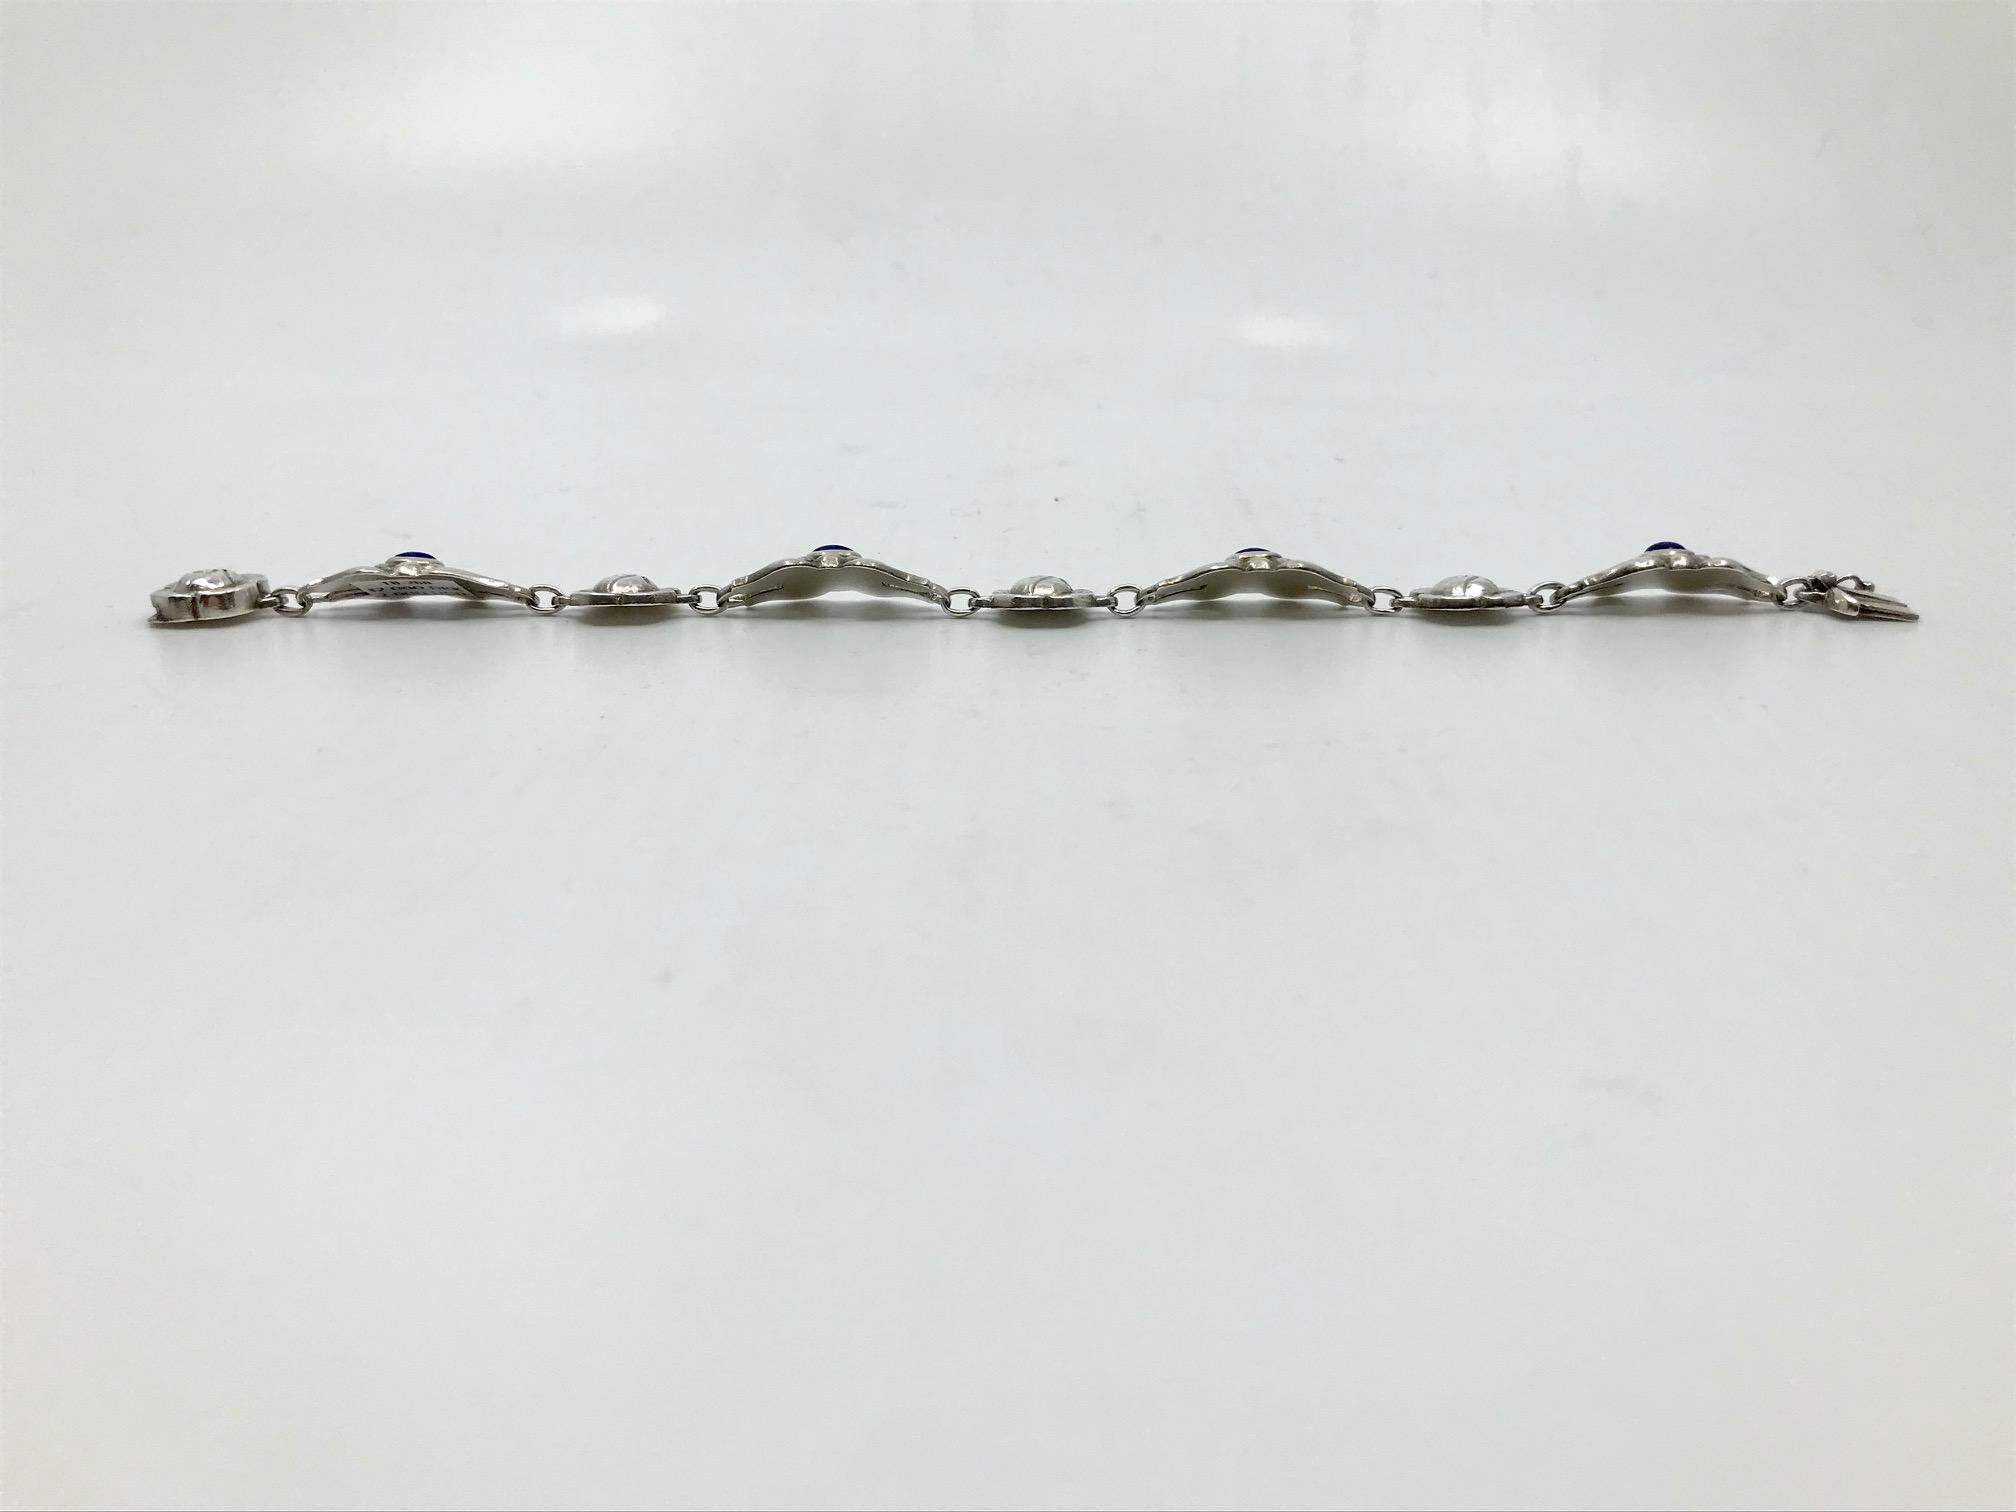 Vintage sterling silver Georg Jensen bracelet with lapis lazuli, design #18 by Georg Jensen.

Measures 7½” in length, the links are ½” across (19.2cm, 1.3cm). The links are curved for a better fit.

Vintage Georg Jensen hallmark from 1933-1944.